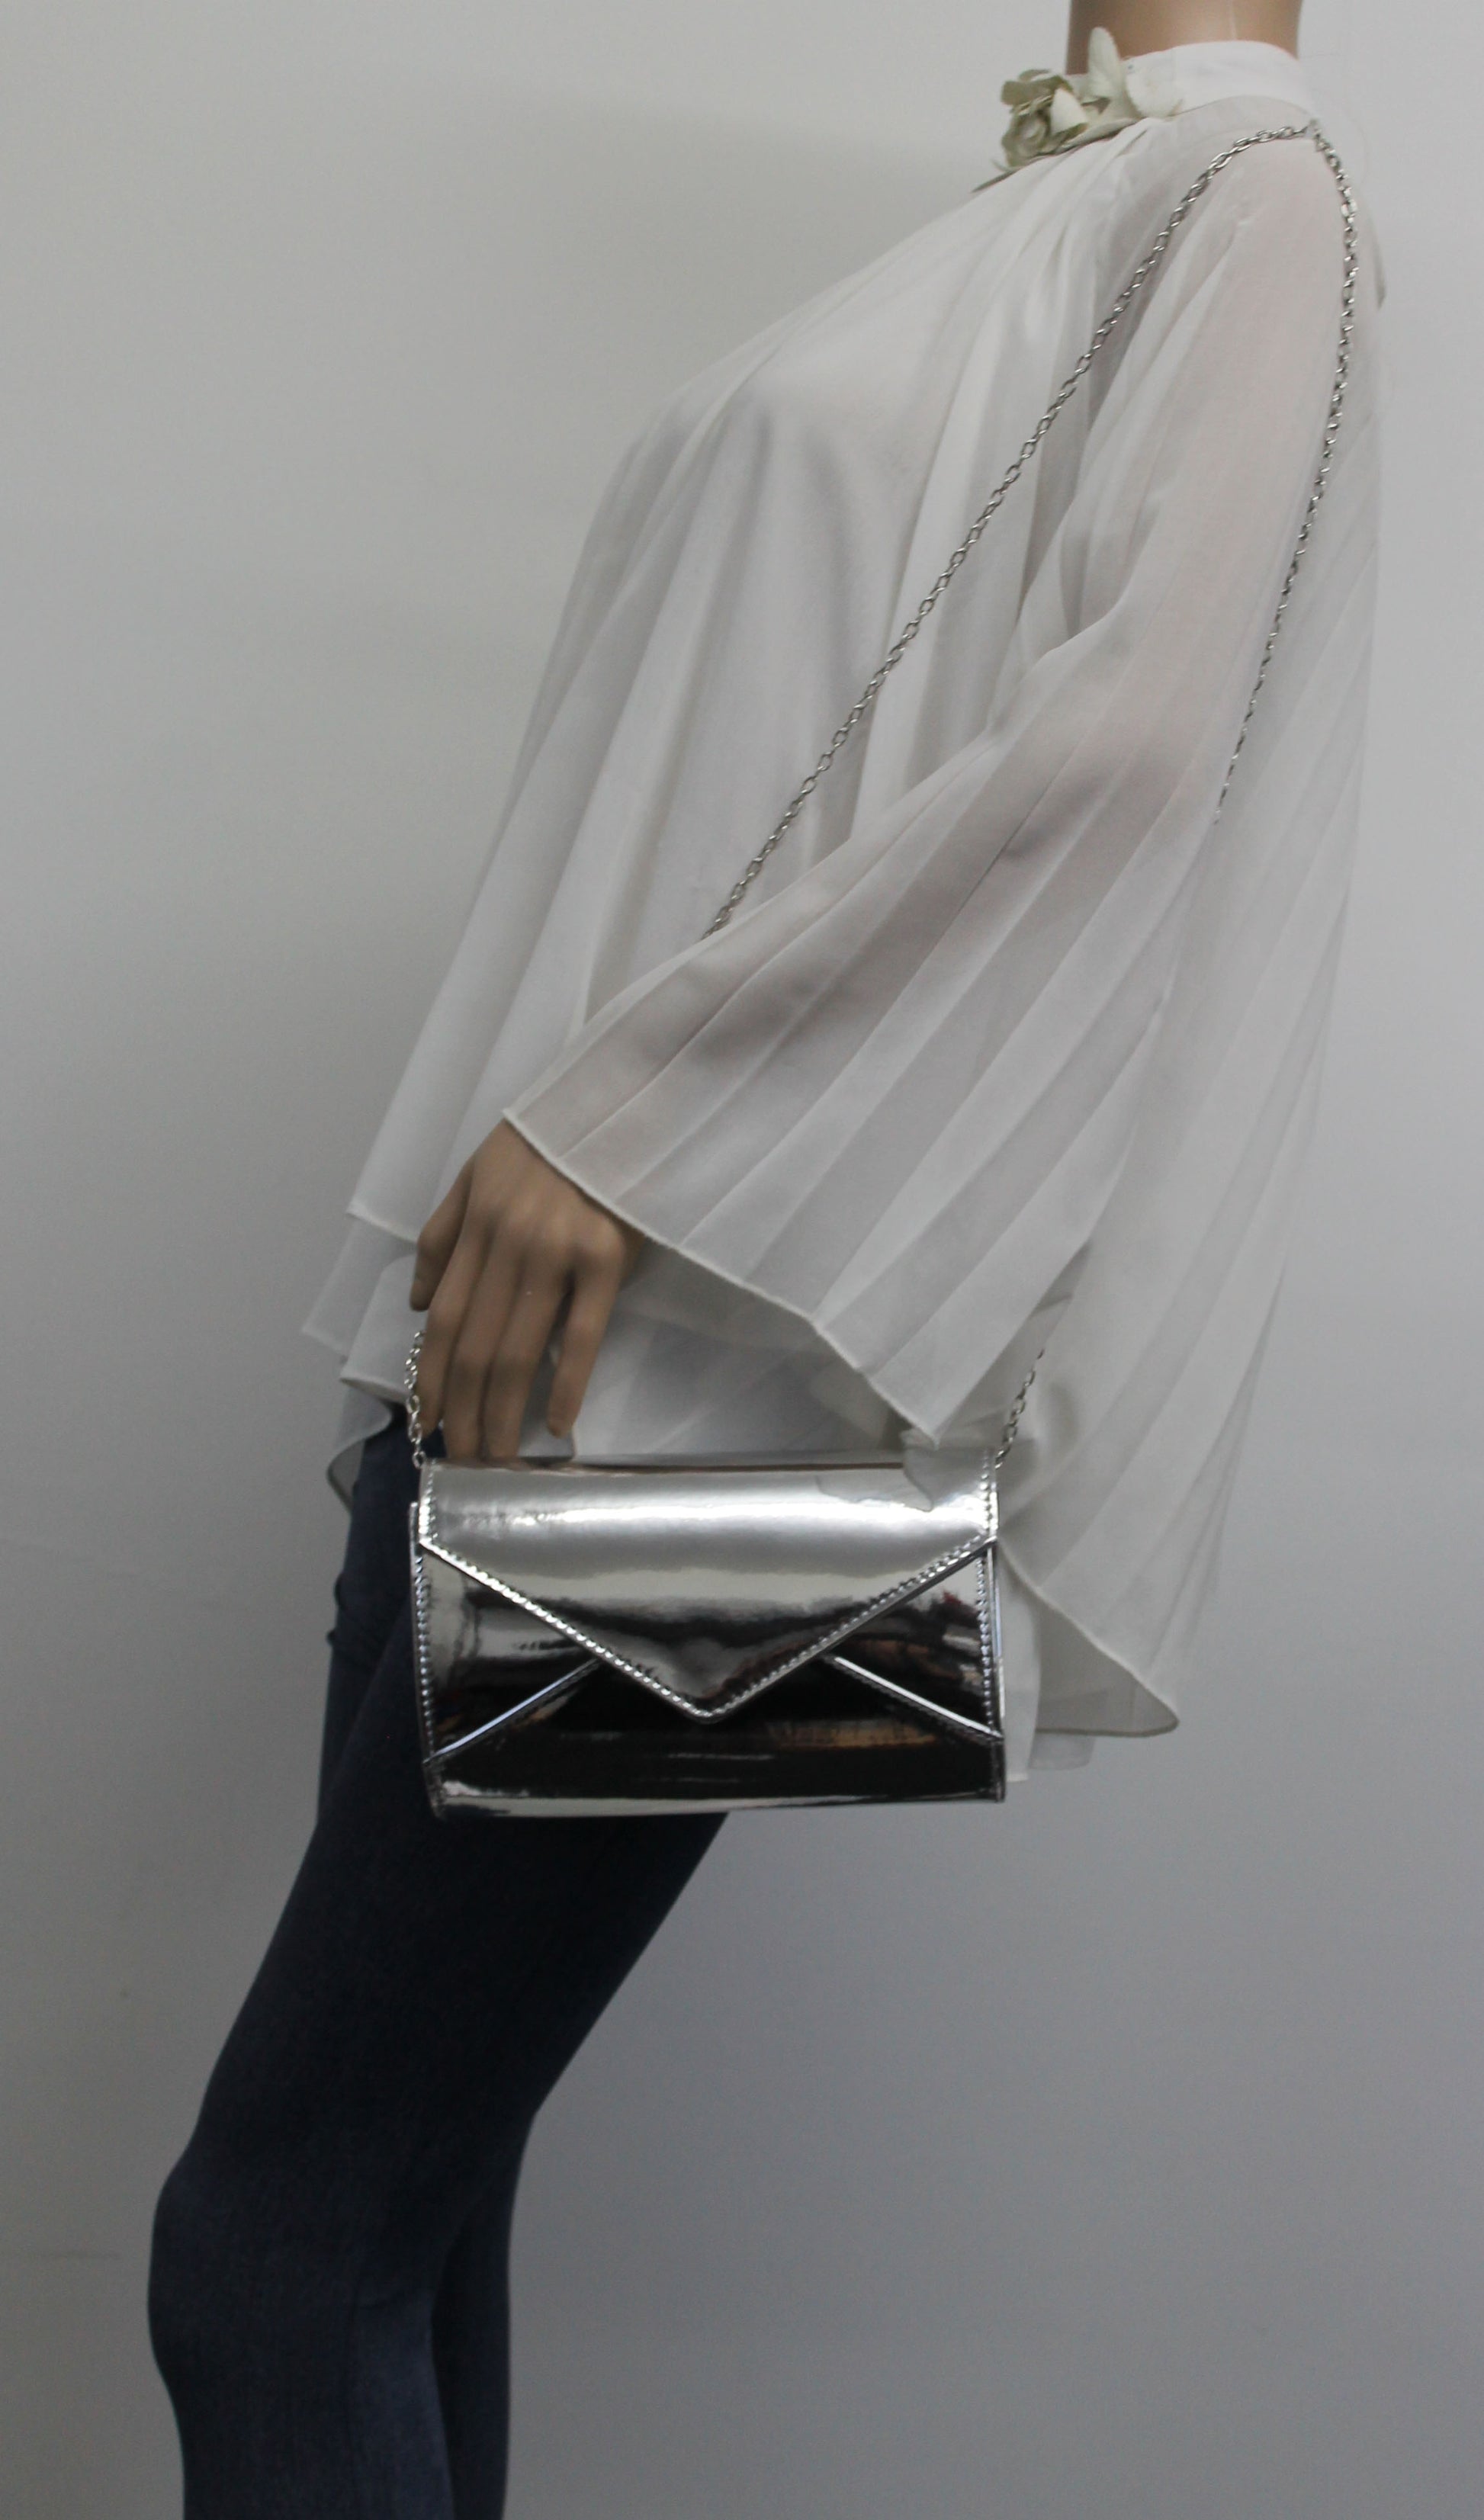 SWANKYSWANS Emely Patent Clutch Bag Silver Cute Cheap Clutch Bag For Weddings School and Work